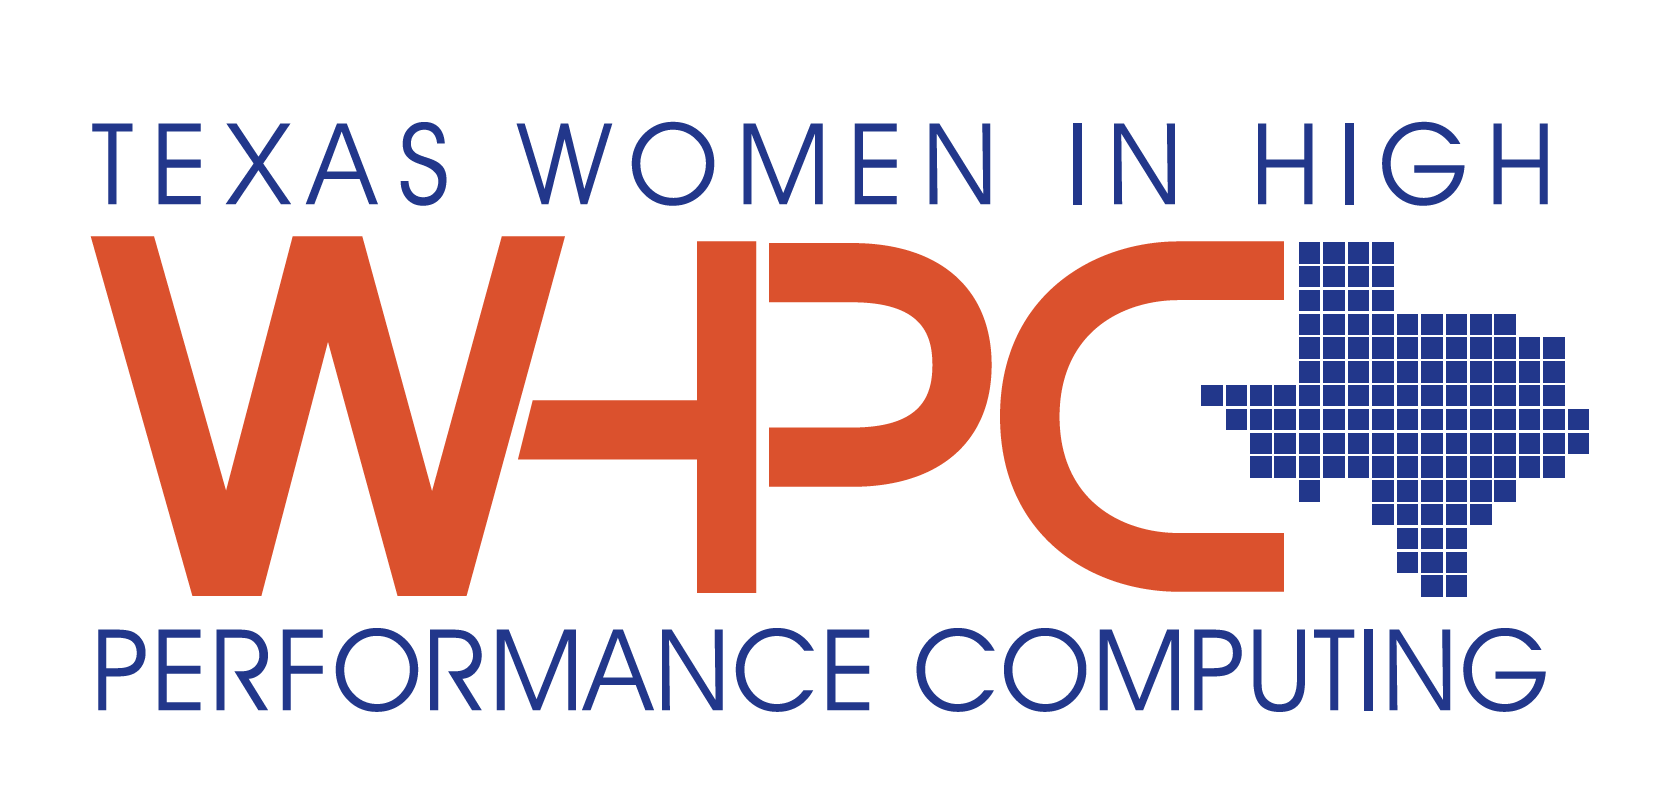 Go to Texas Women in High Performance Computing